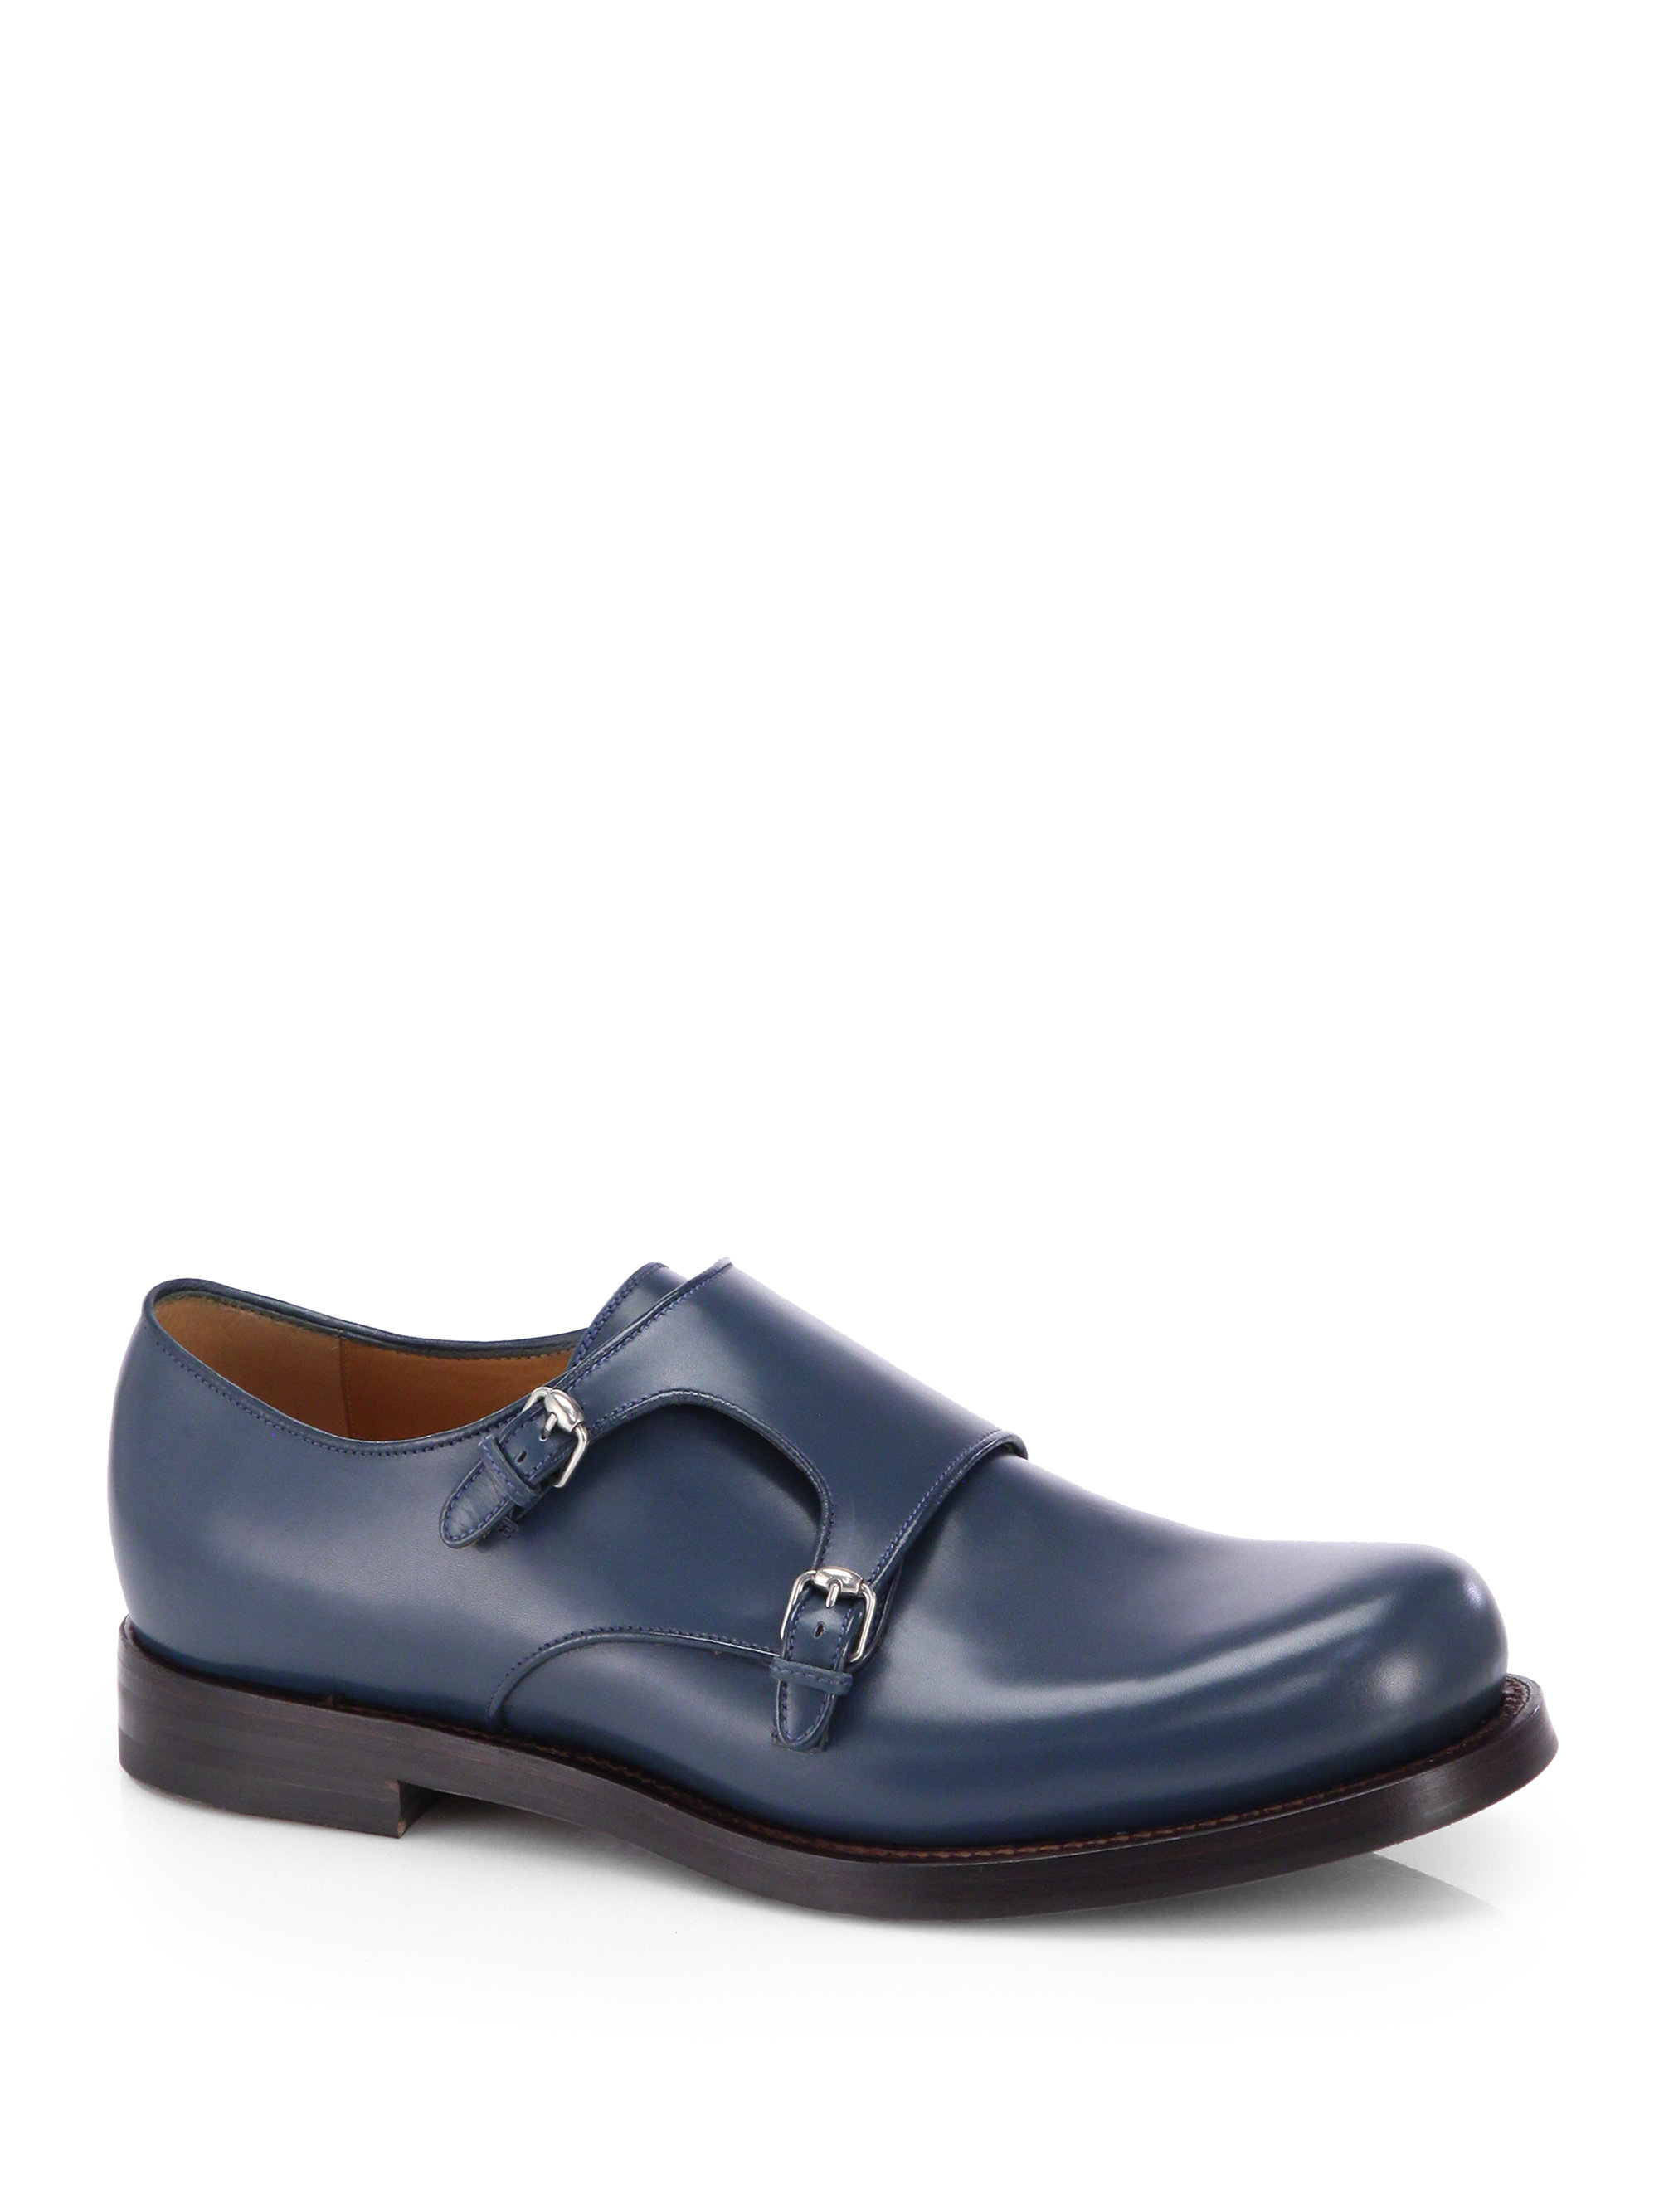 Gucci Double Monk Strap Leather Dress Shoes in Blue for Men - Lyst